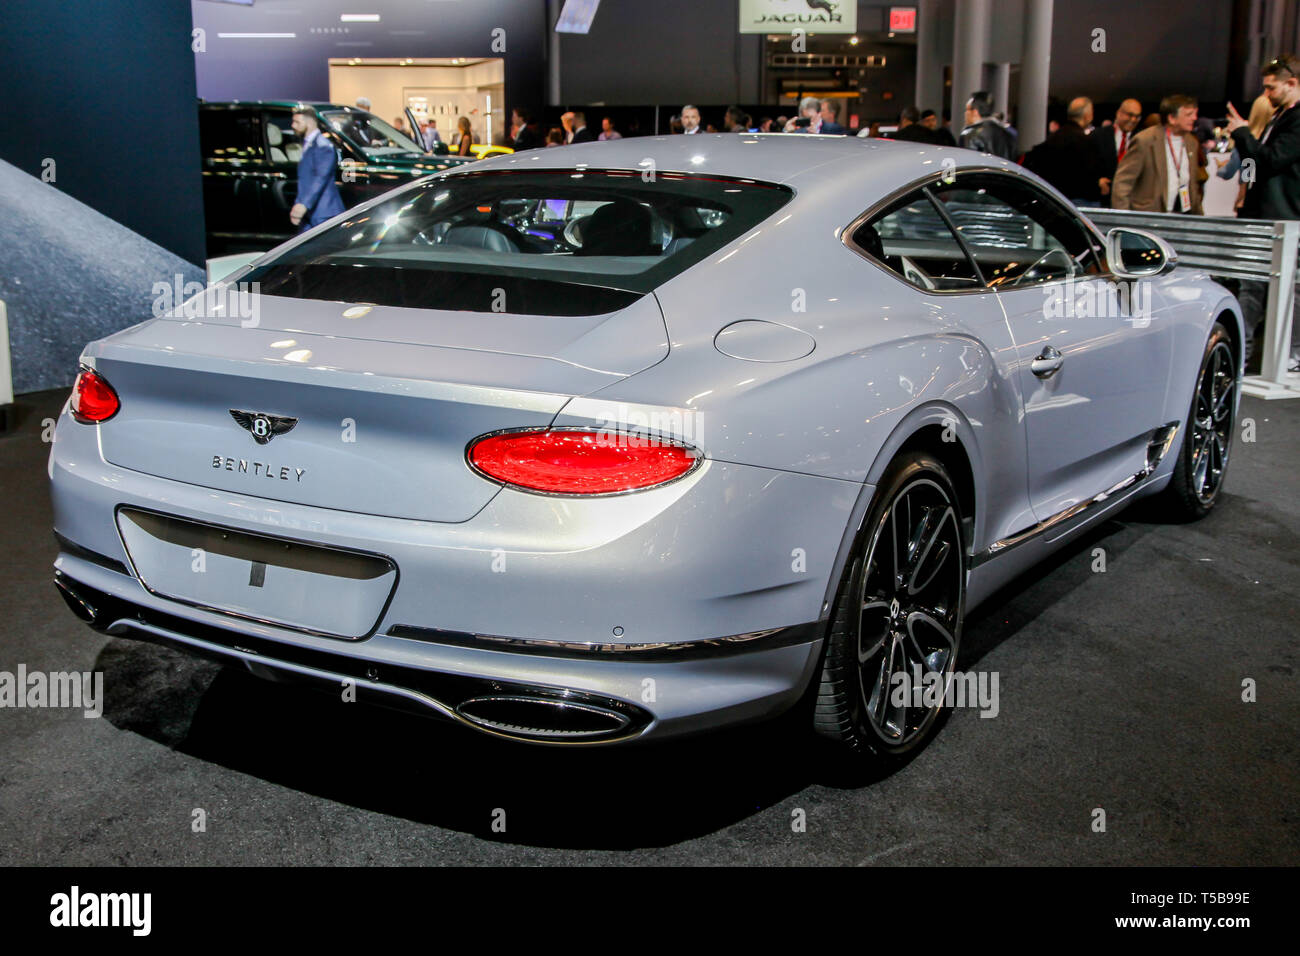 Bentley Continental GT at the New York International Auto Show 2019, at the Jacob Javits Center. This was Press Preview Day One of NYIAS Stock Photo